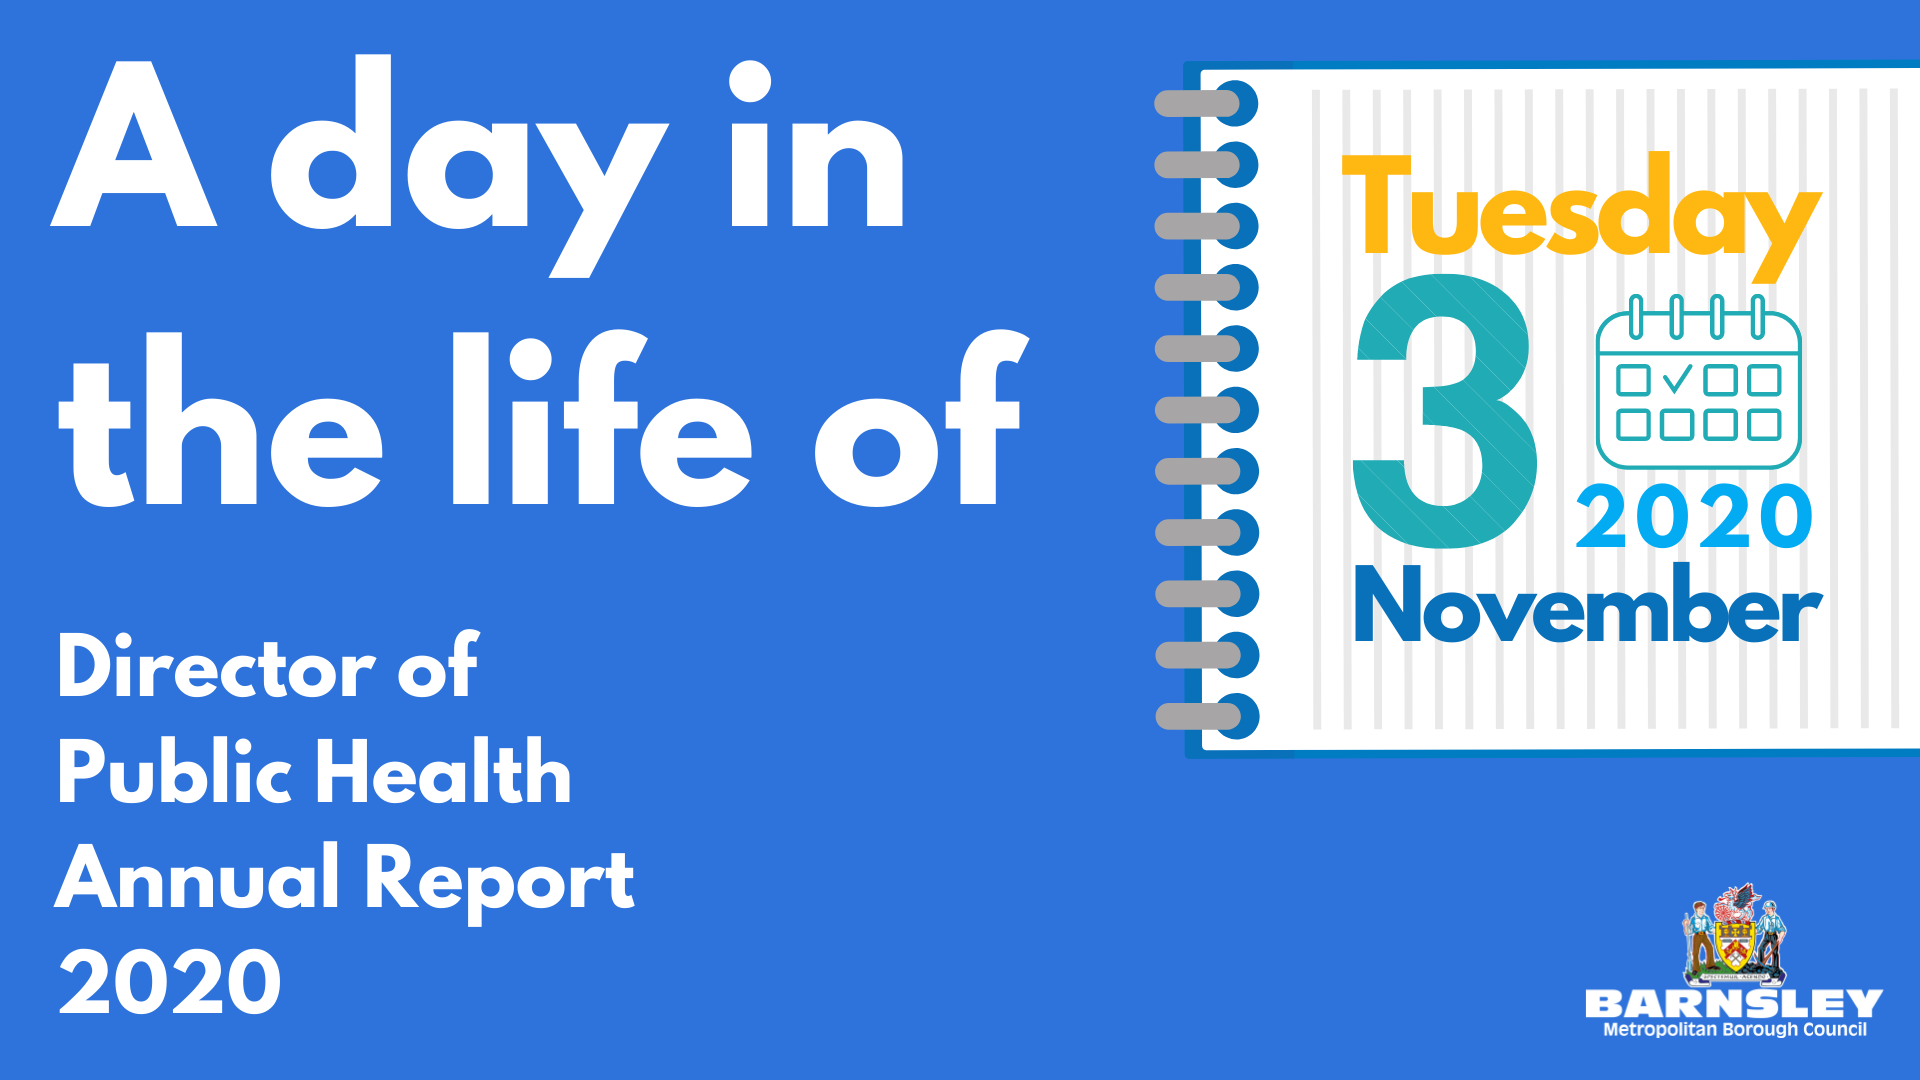 A day in the life of. Director of Public Health annual report 2020